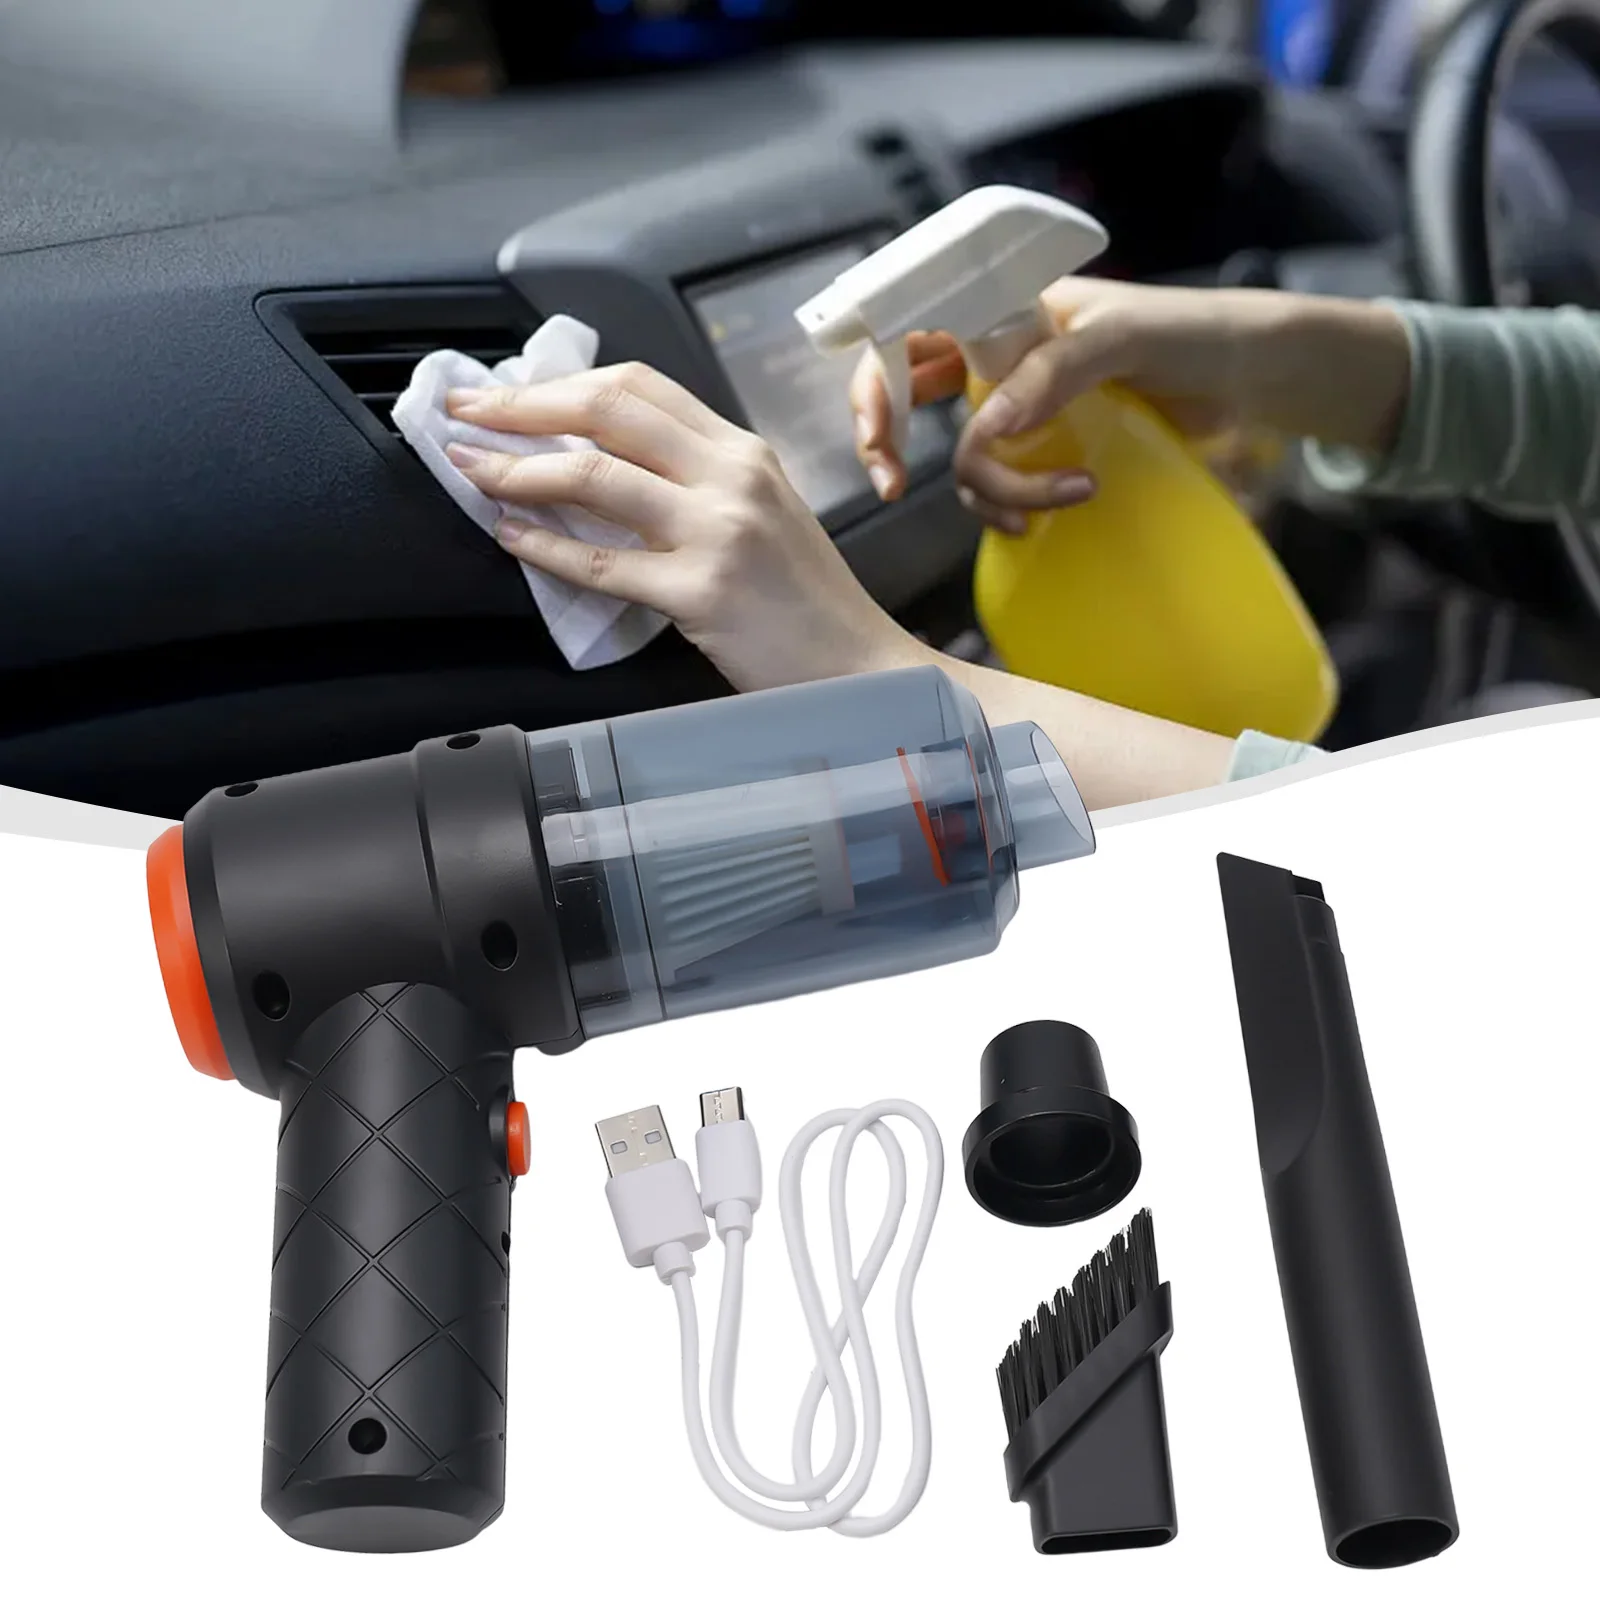 

Wireless Car Vacuum Cleaner 6000Pa Cordless Handheld Auto Vacuum High-power Vacuum Cleaner For Home Office Car